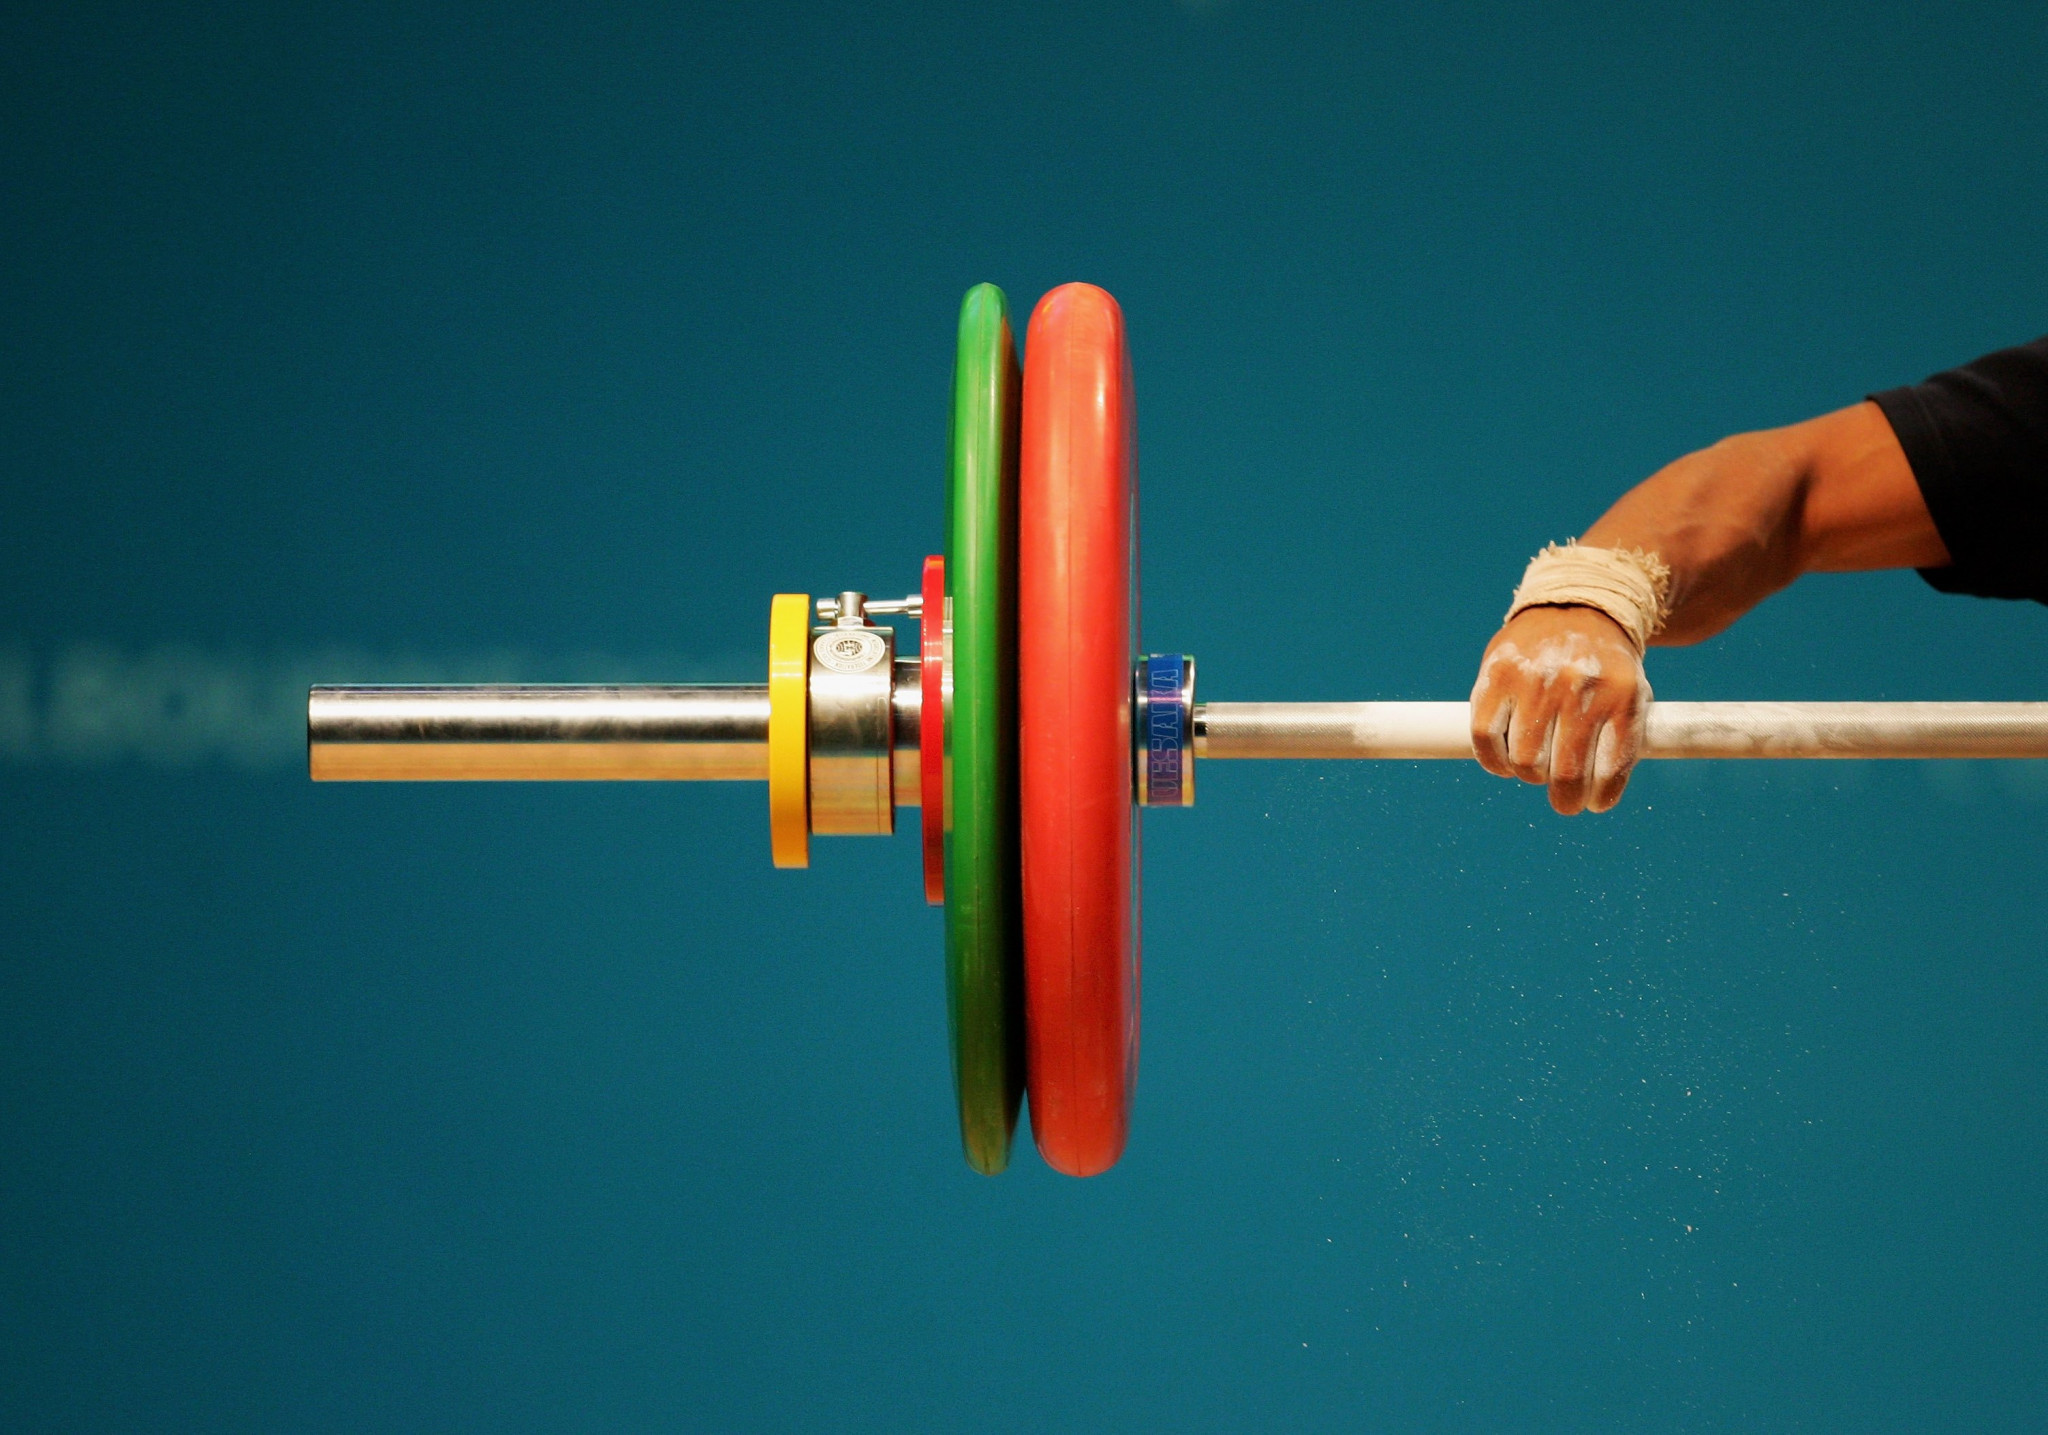 Colorado Springs is set to host the USA Weightlifting National Championships next year ©Getty Images